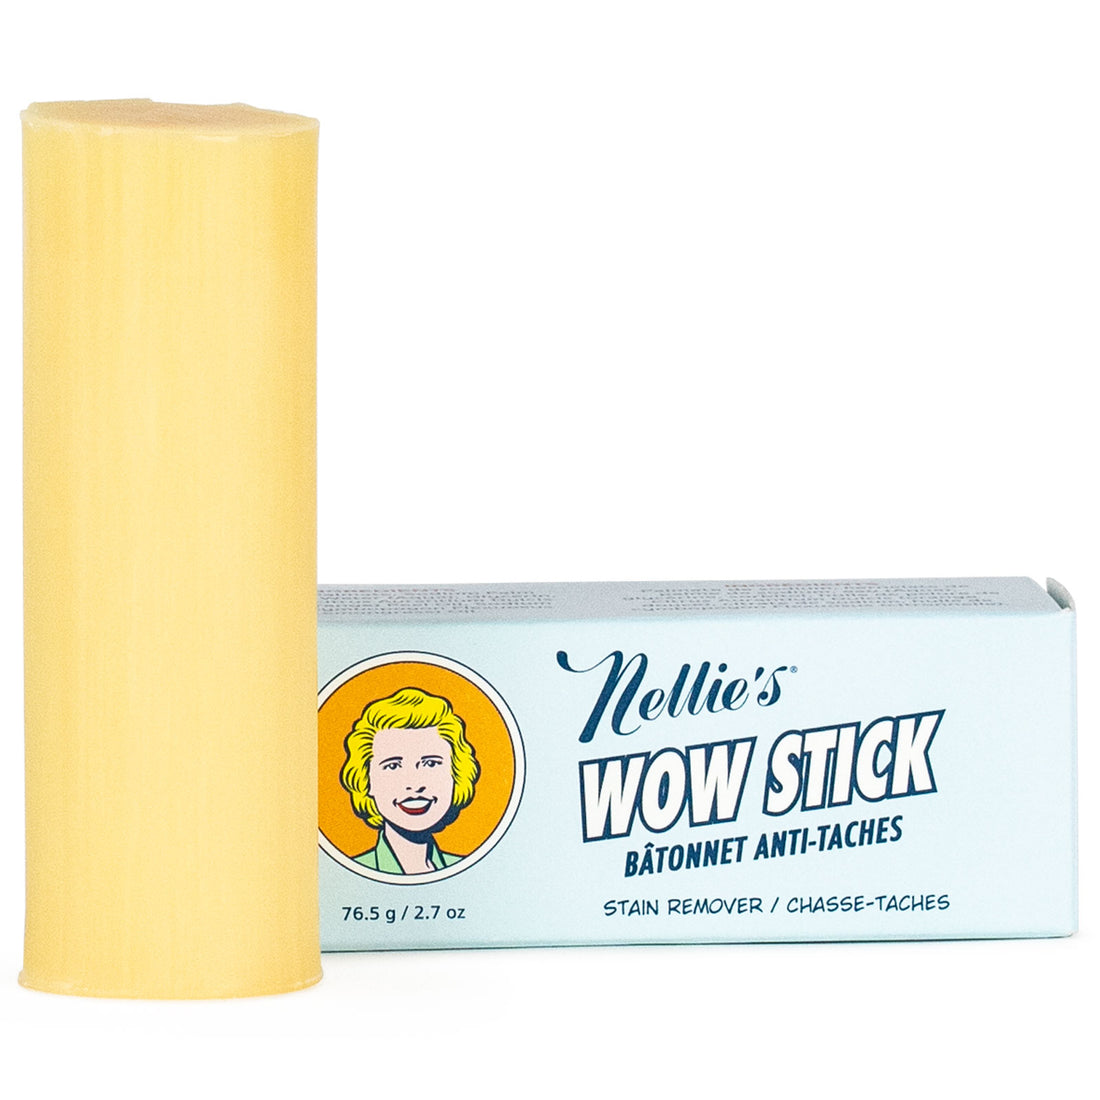 WOW Stick Stain Remover in a refreshing lemongrass scent